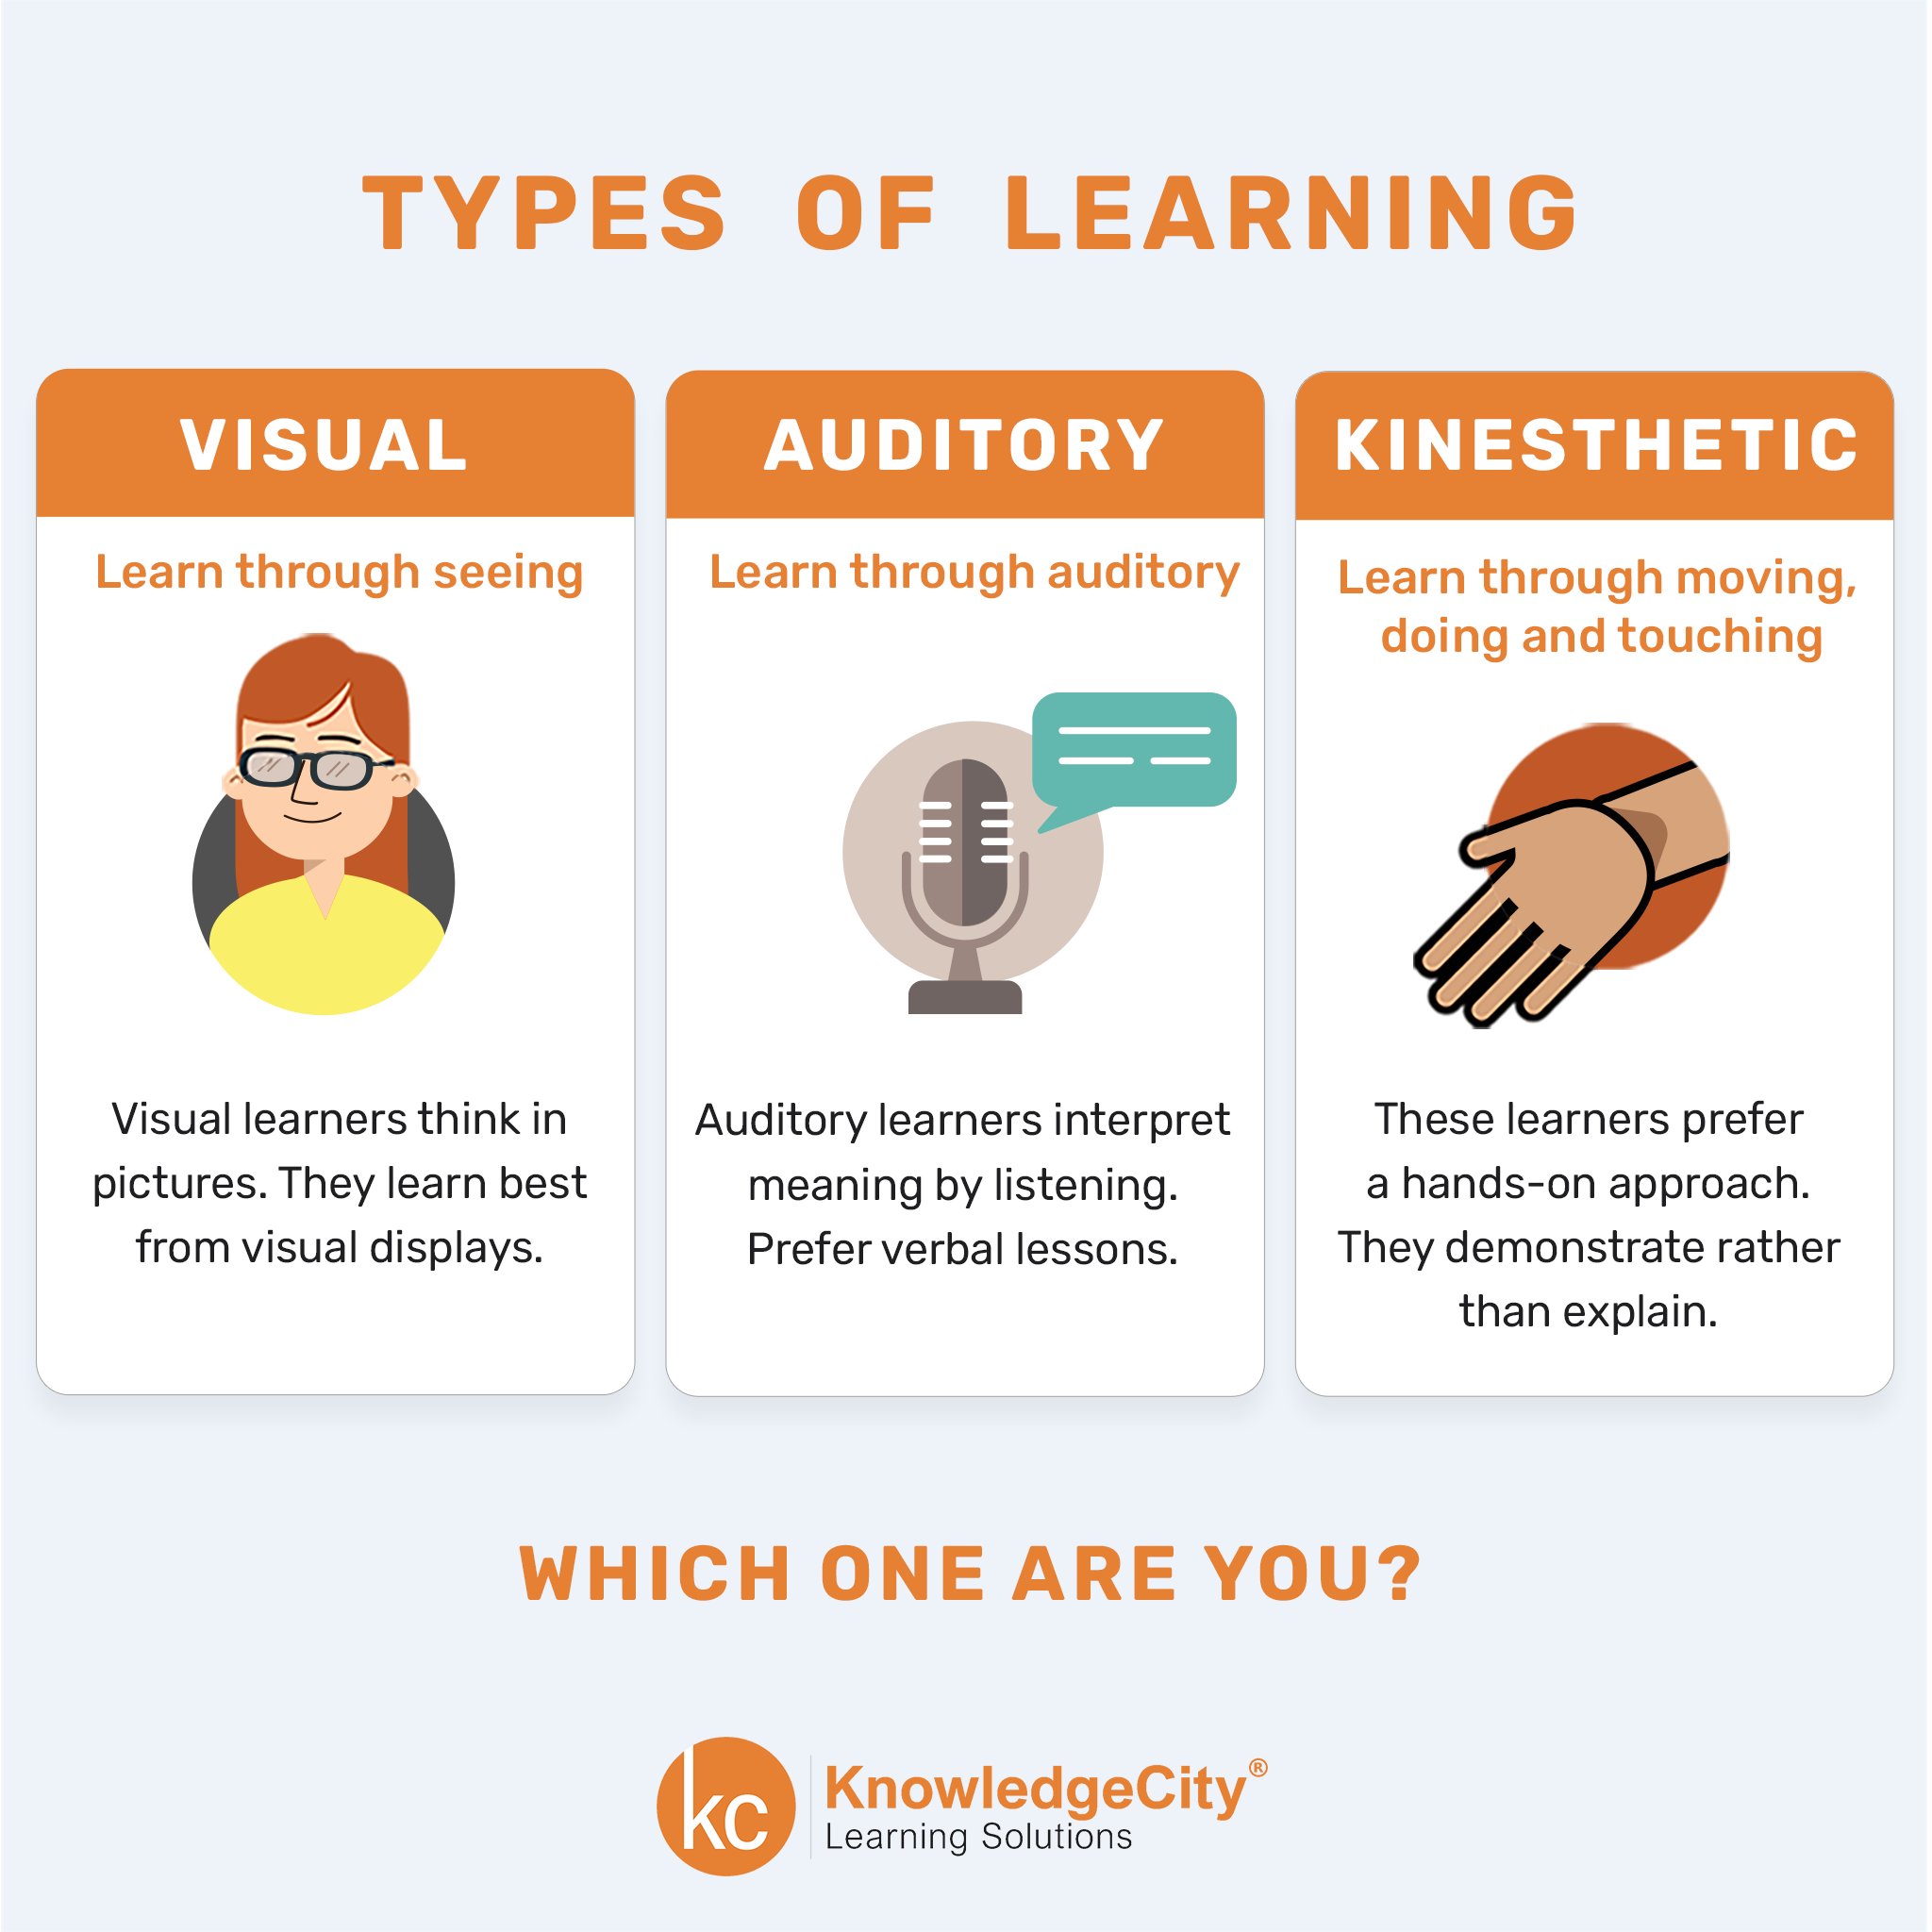 What are the 3 most common types of learners?